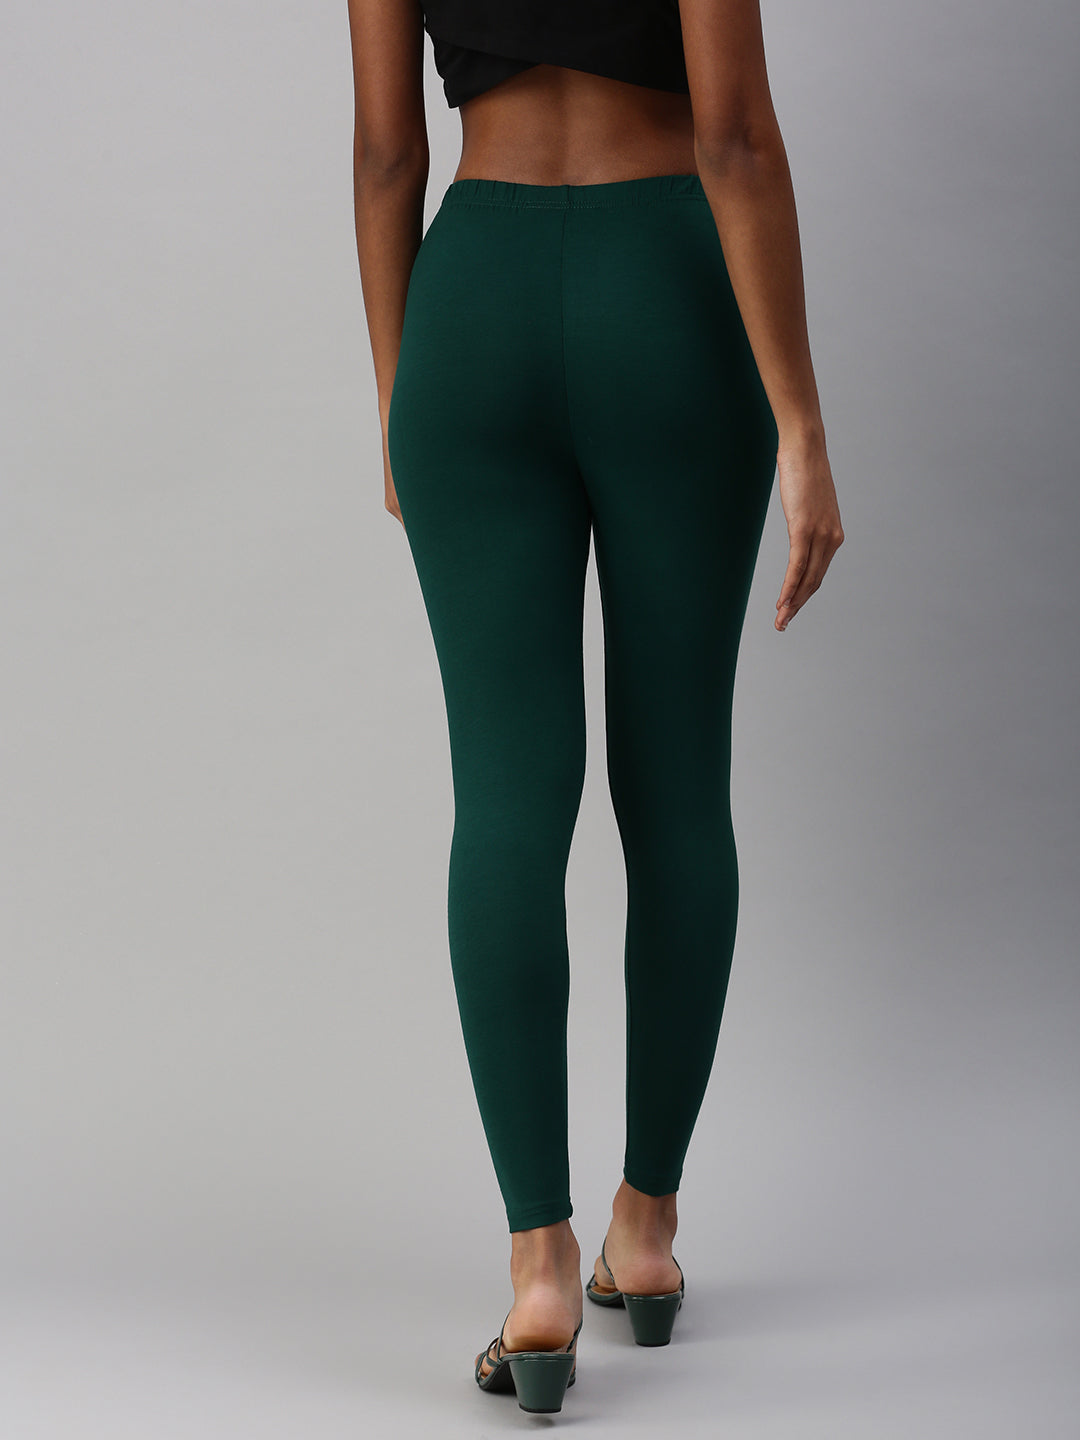 Buy Dark Green Solid Cotton Tights Online - W for Woman